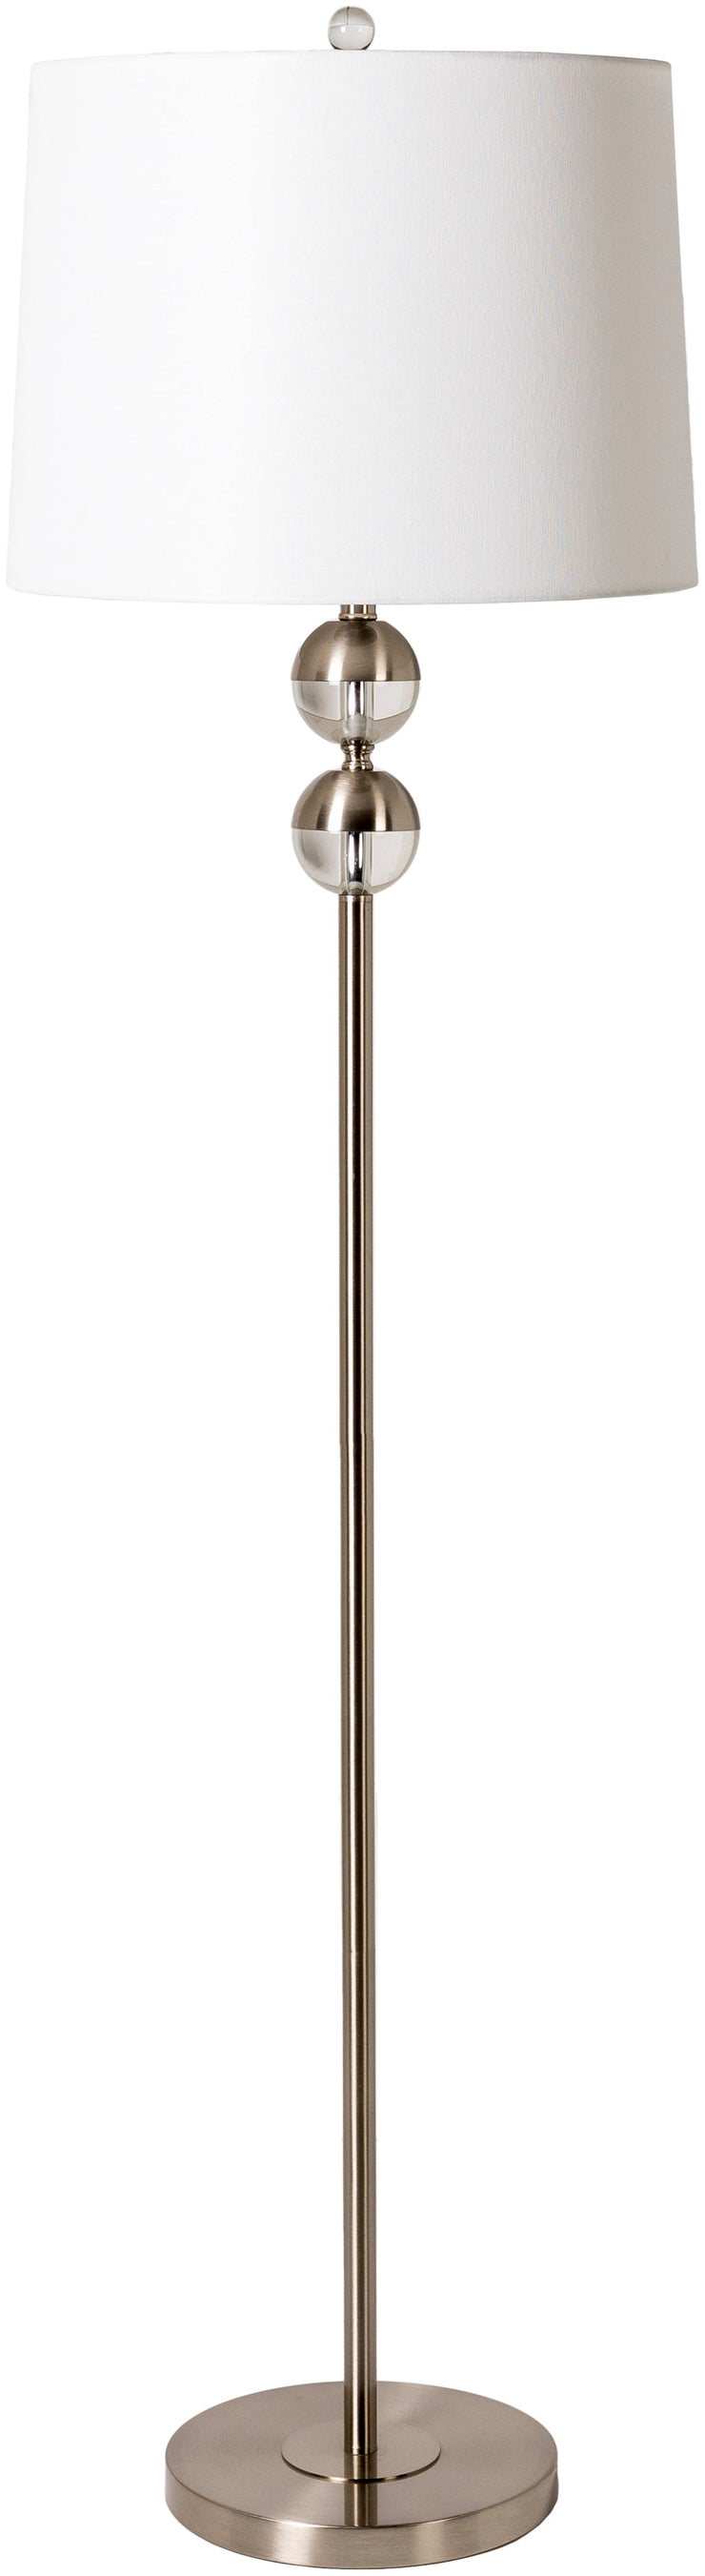 caterina floor lamps by surya ctr 001 1